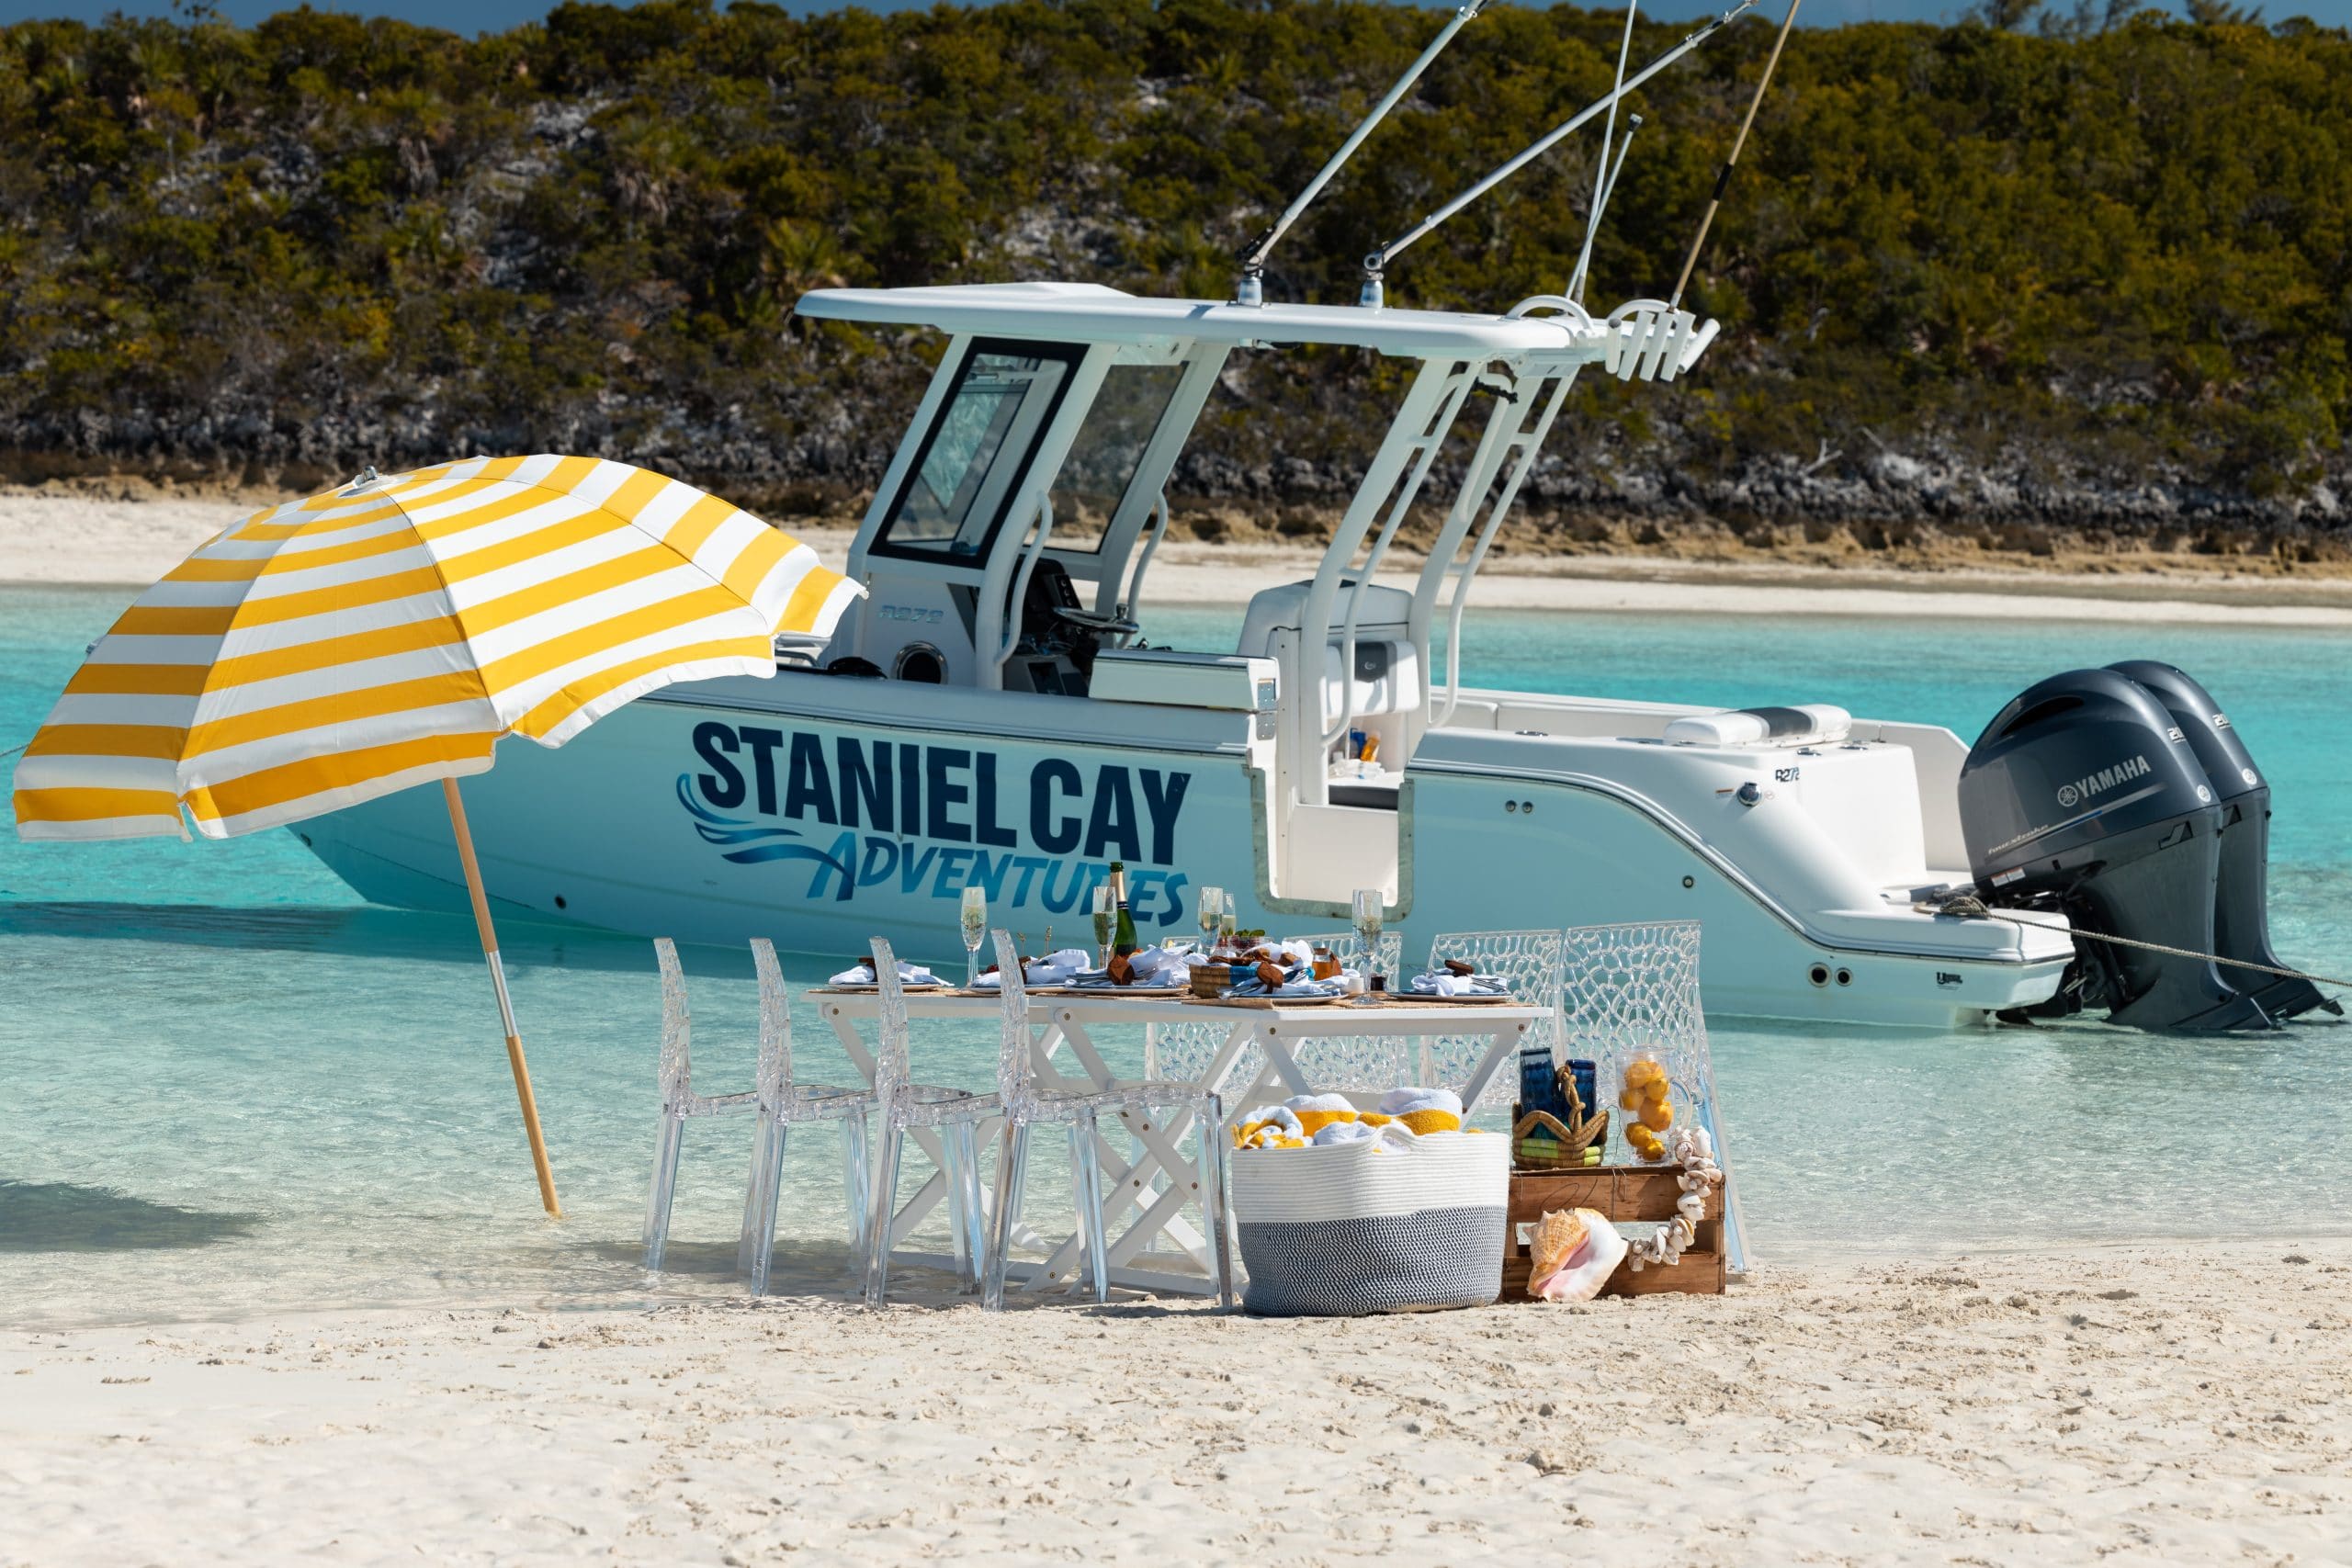 Staniel Cay Yacht Club and Staniel Cay Adventures